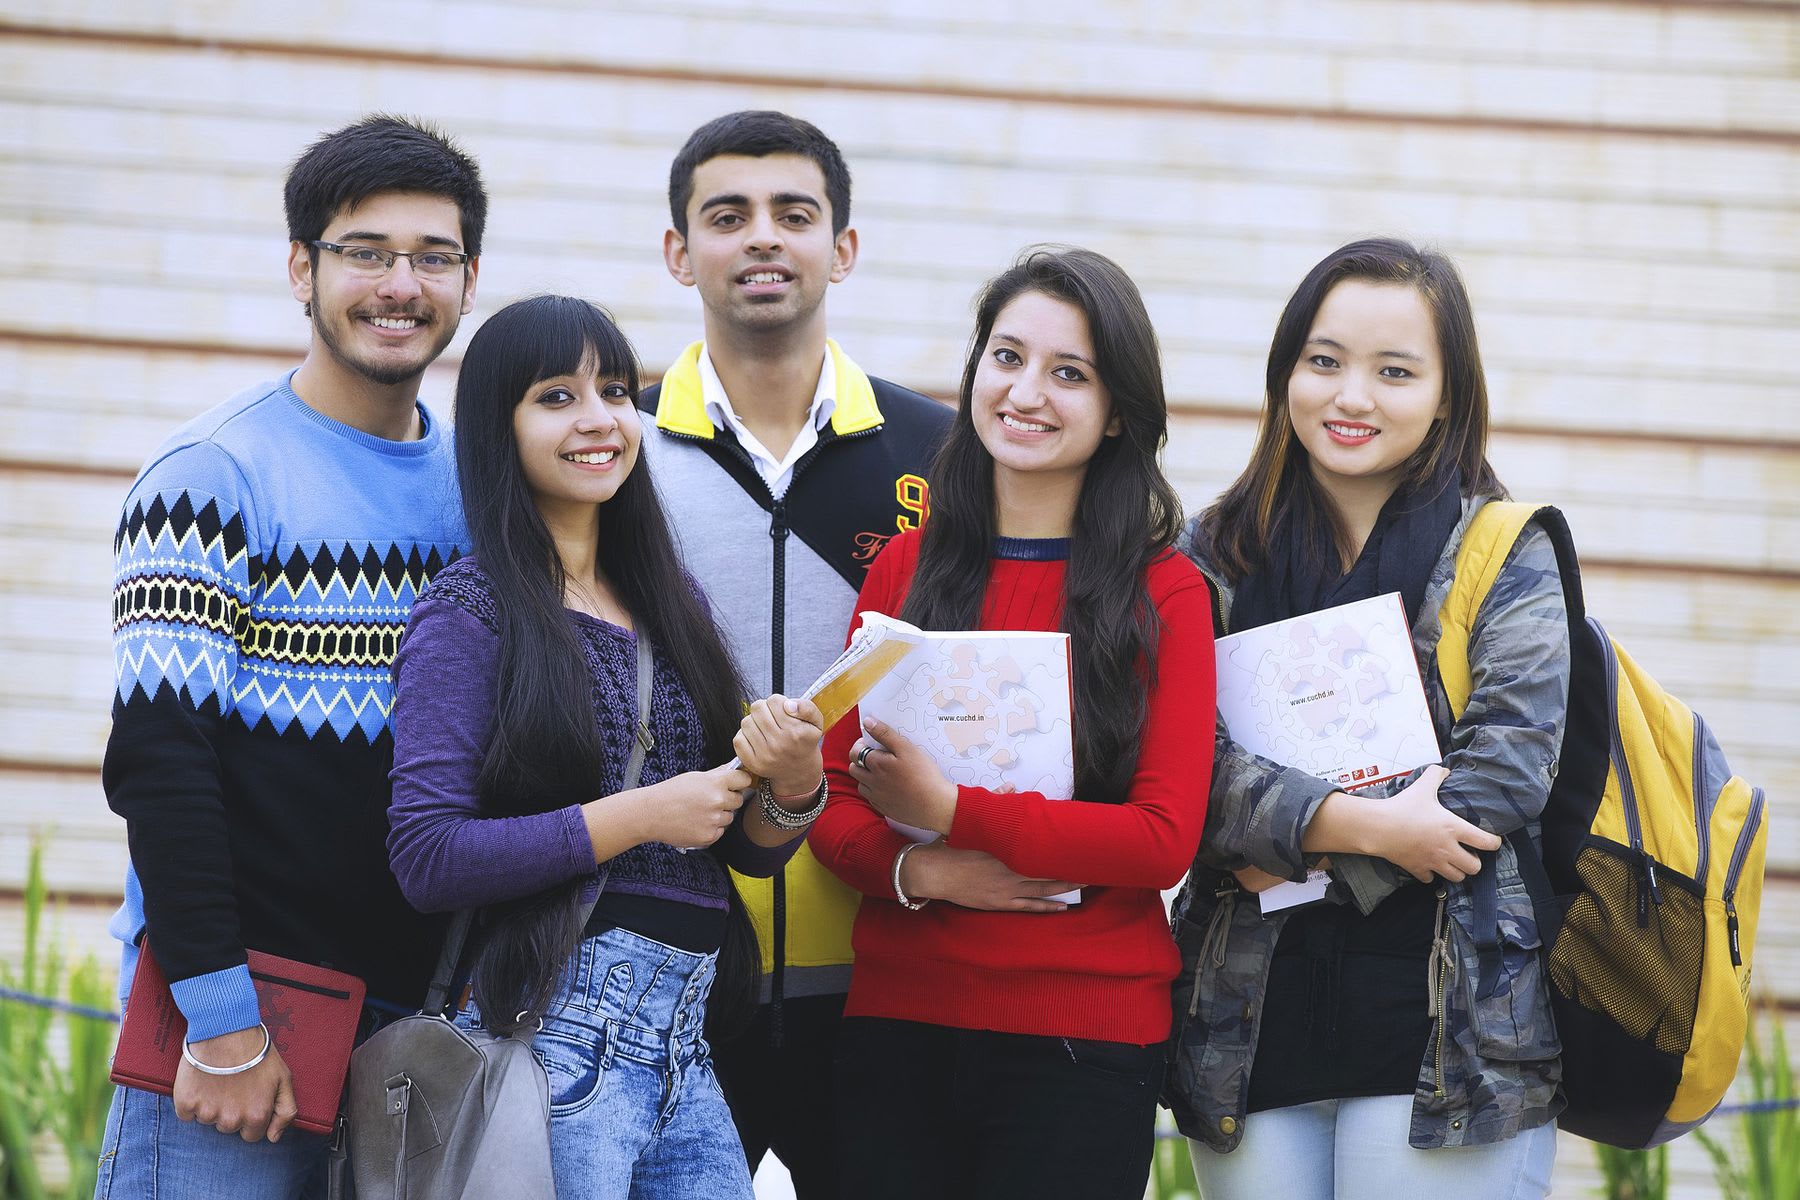 Group of students holding papers and posing for the camera